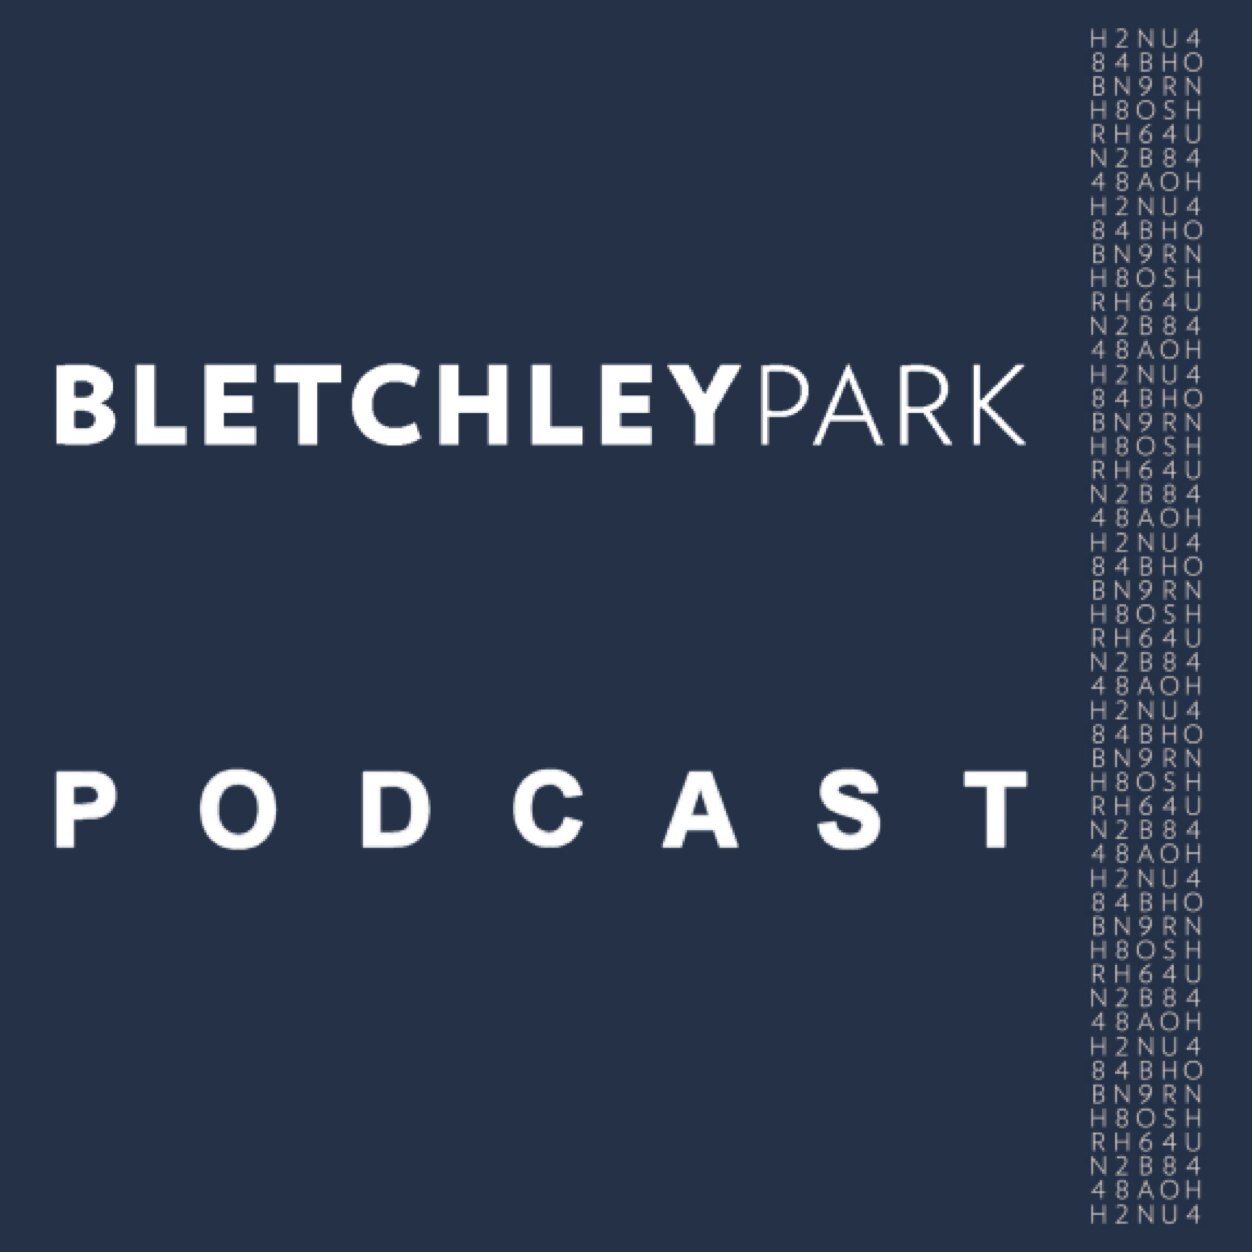 ** This acc will close in July. please follow @Bletchleypark ** The Official Bletchley Park Podcast. https://t.co/k6c8iDsU2X